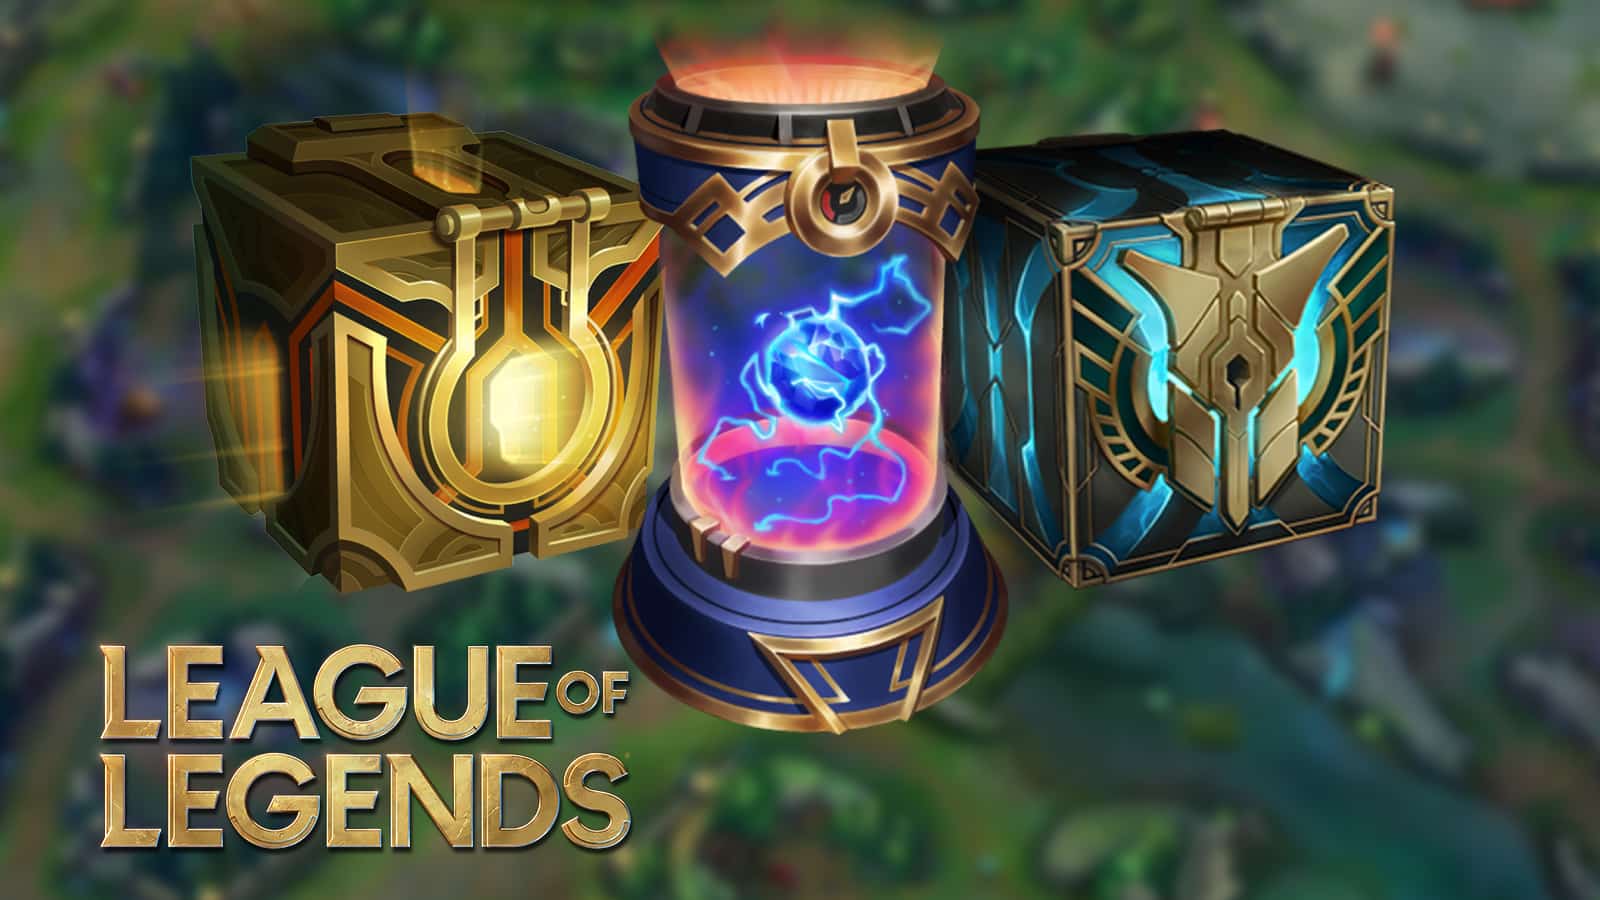 League of Legends players can claim four free Loot Capsules